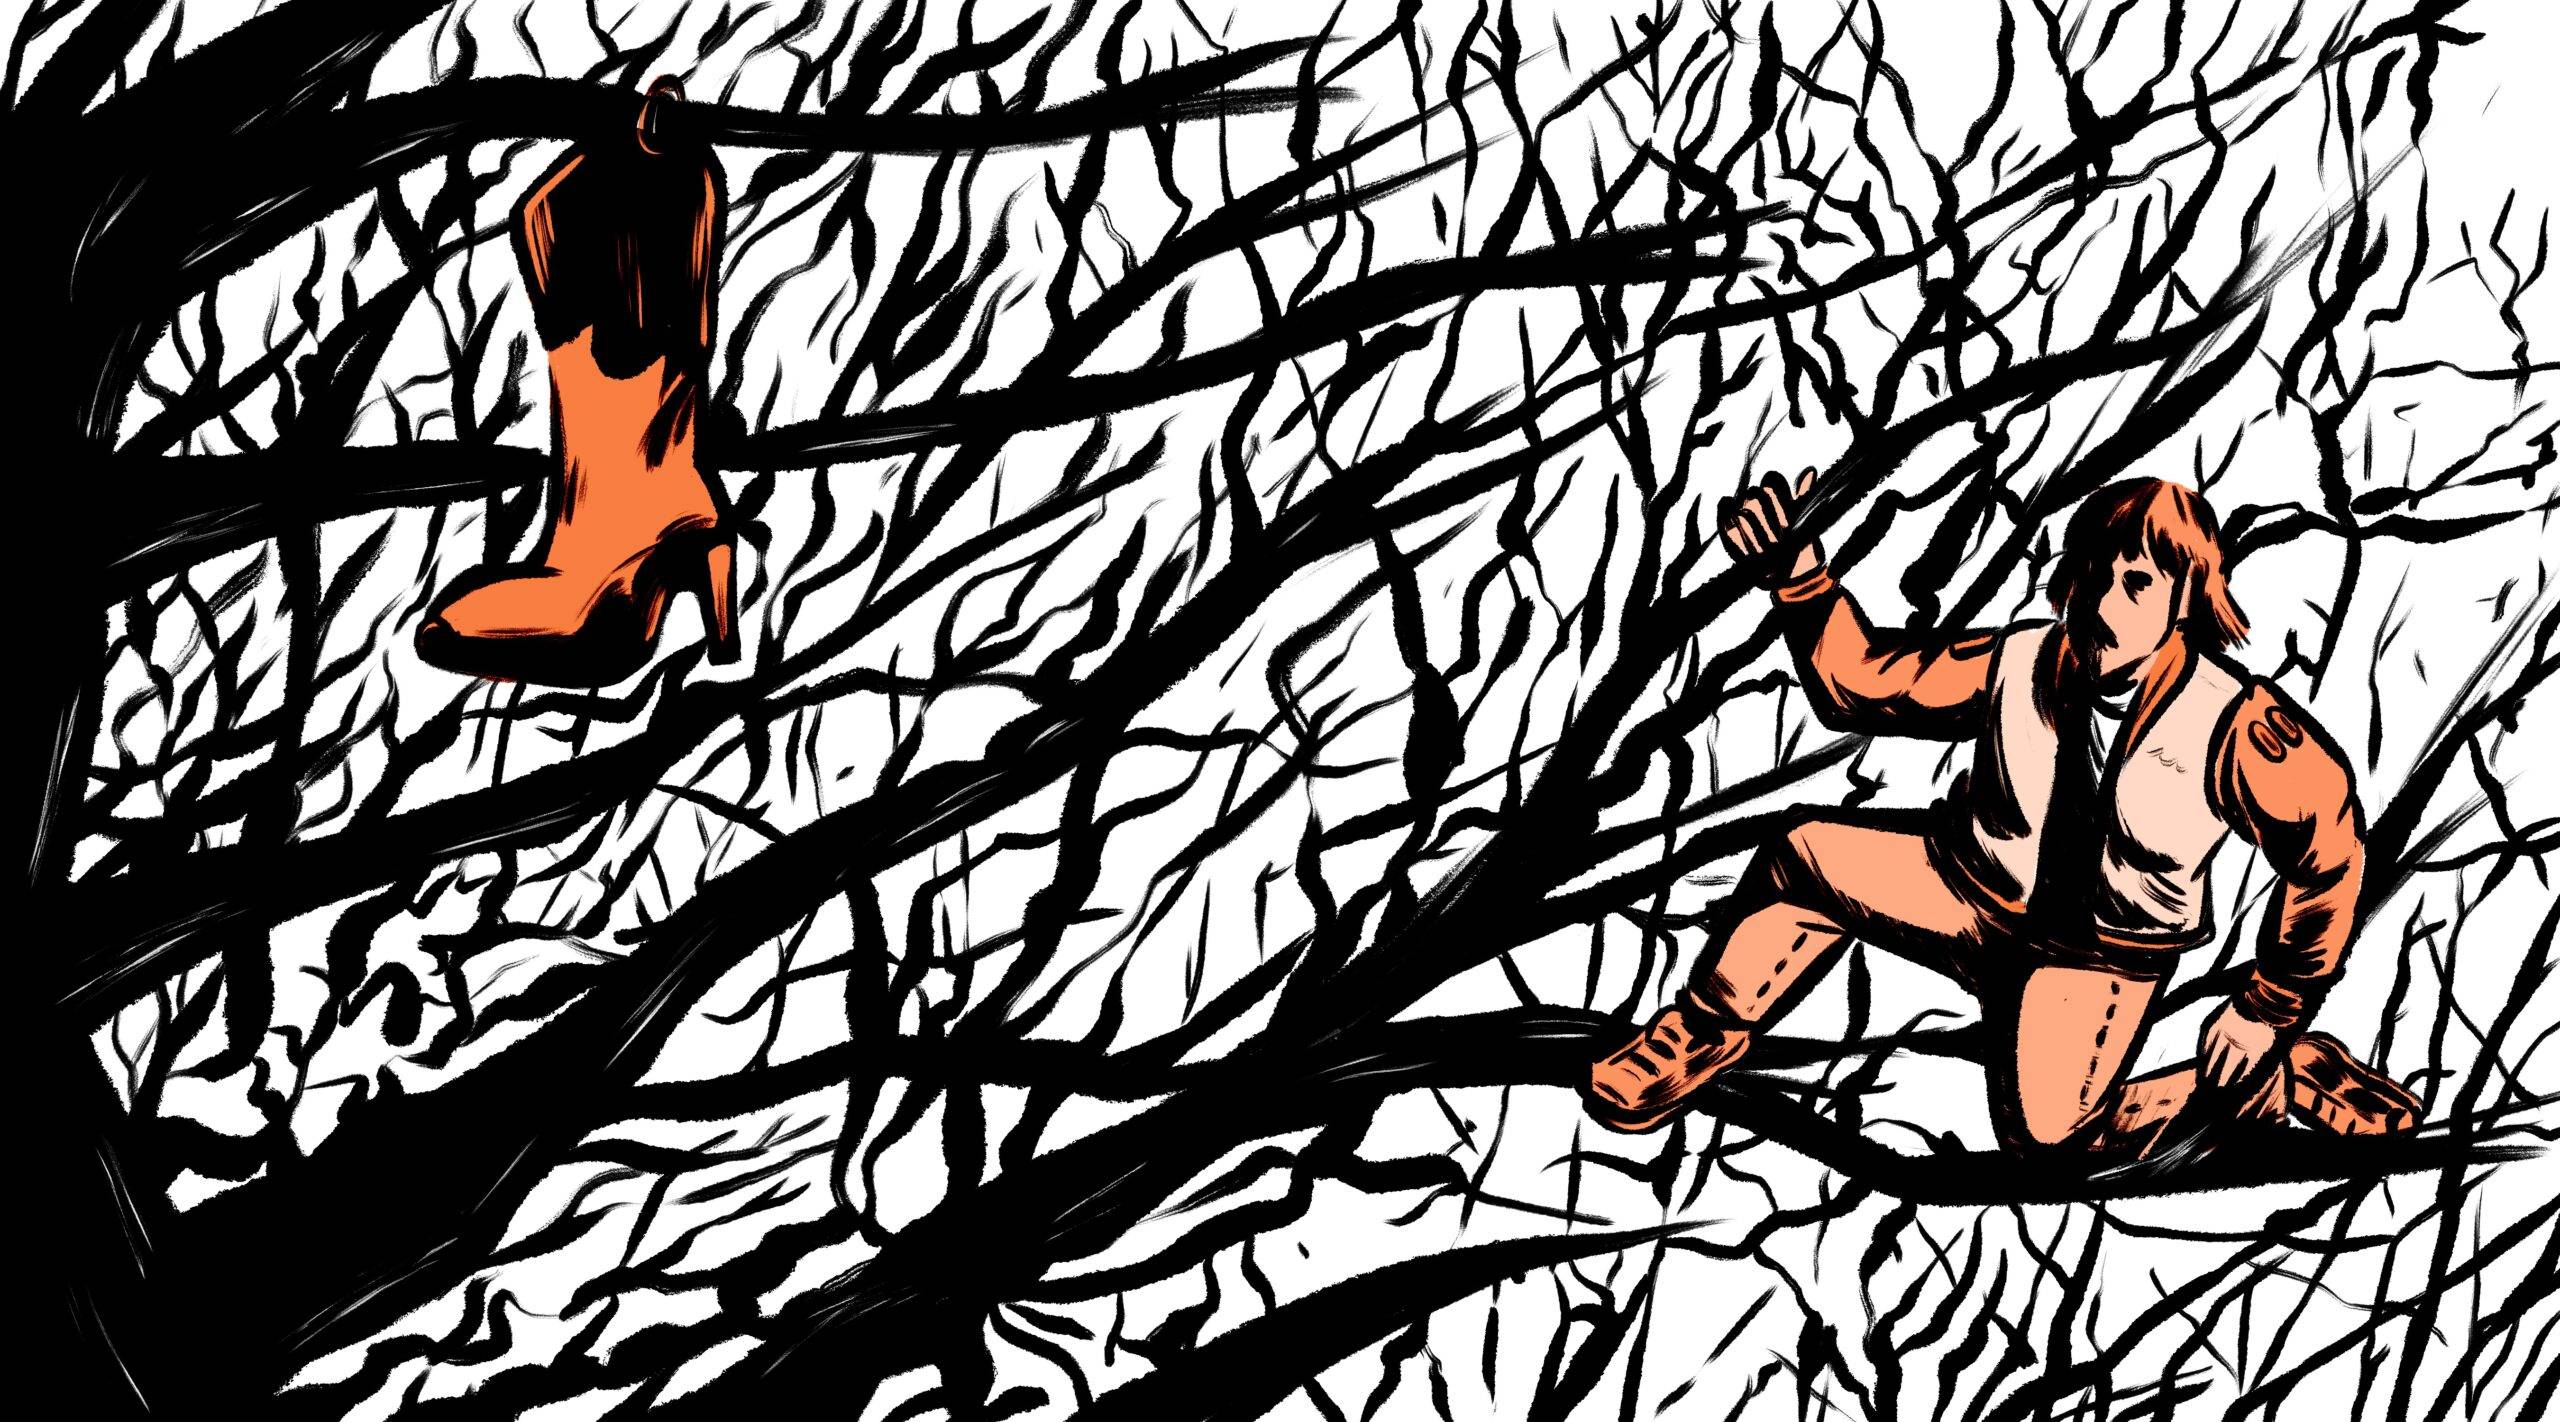 illustration showing a cowboy boot clipped to the branch of a wispy tree. A person is holding onto other branches, gazing and moving toward the boot.